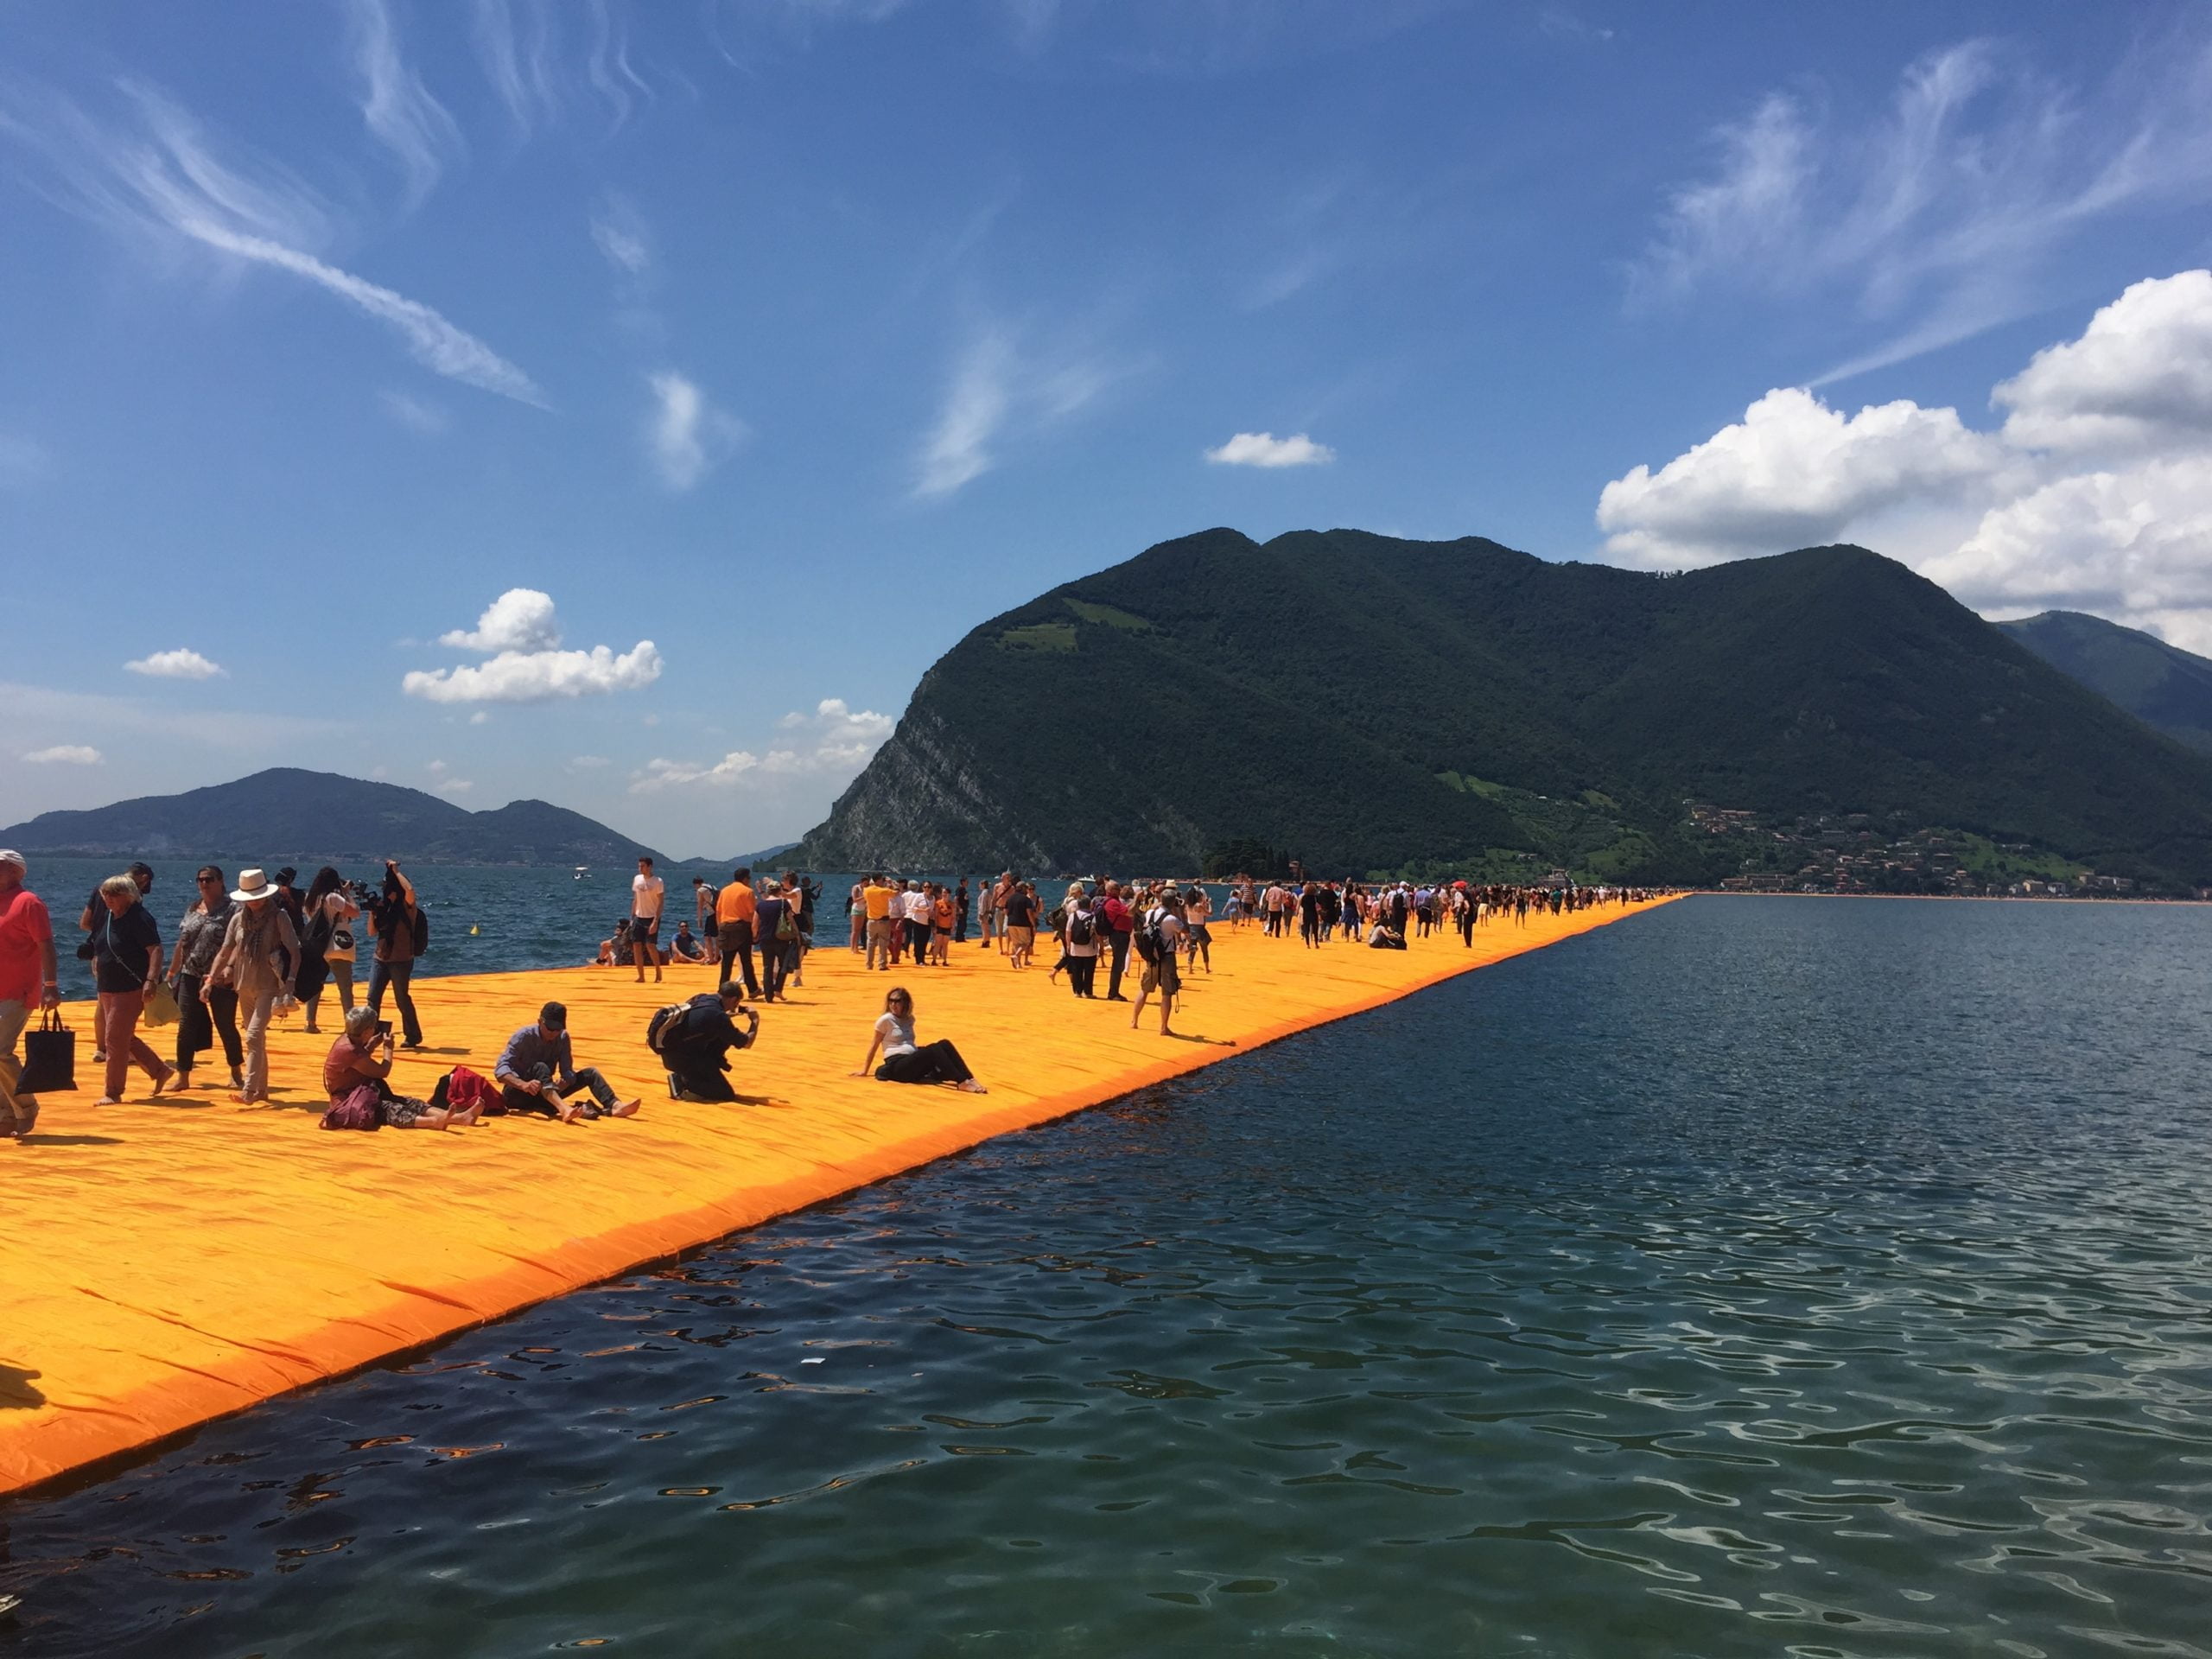 Christo floating piers